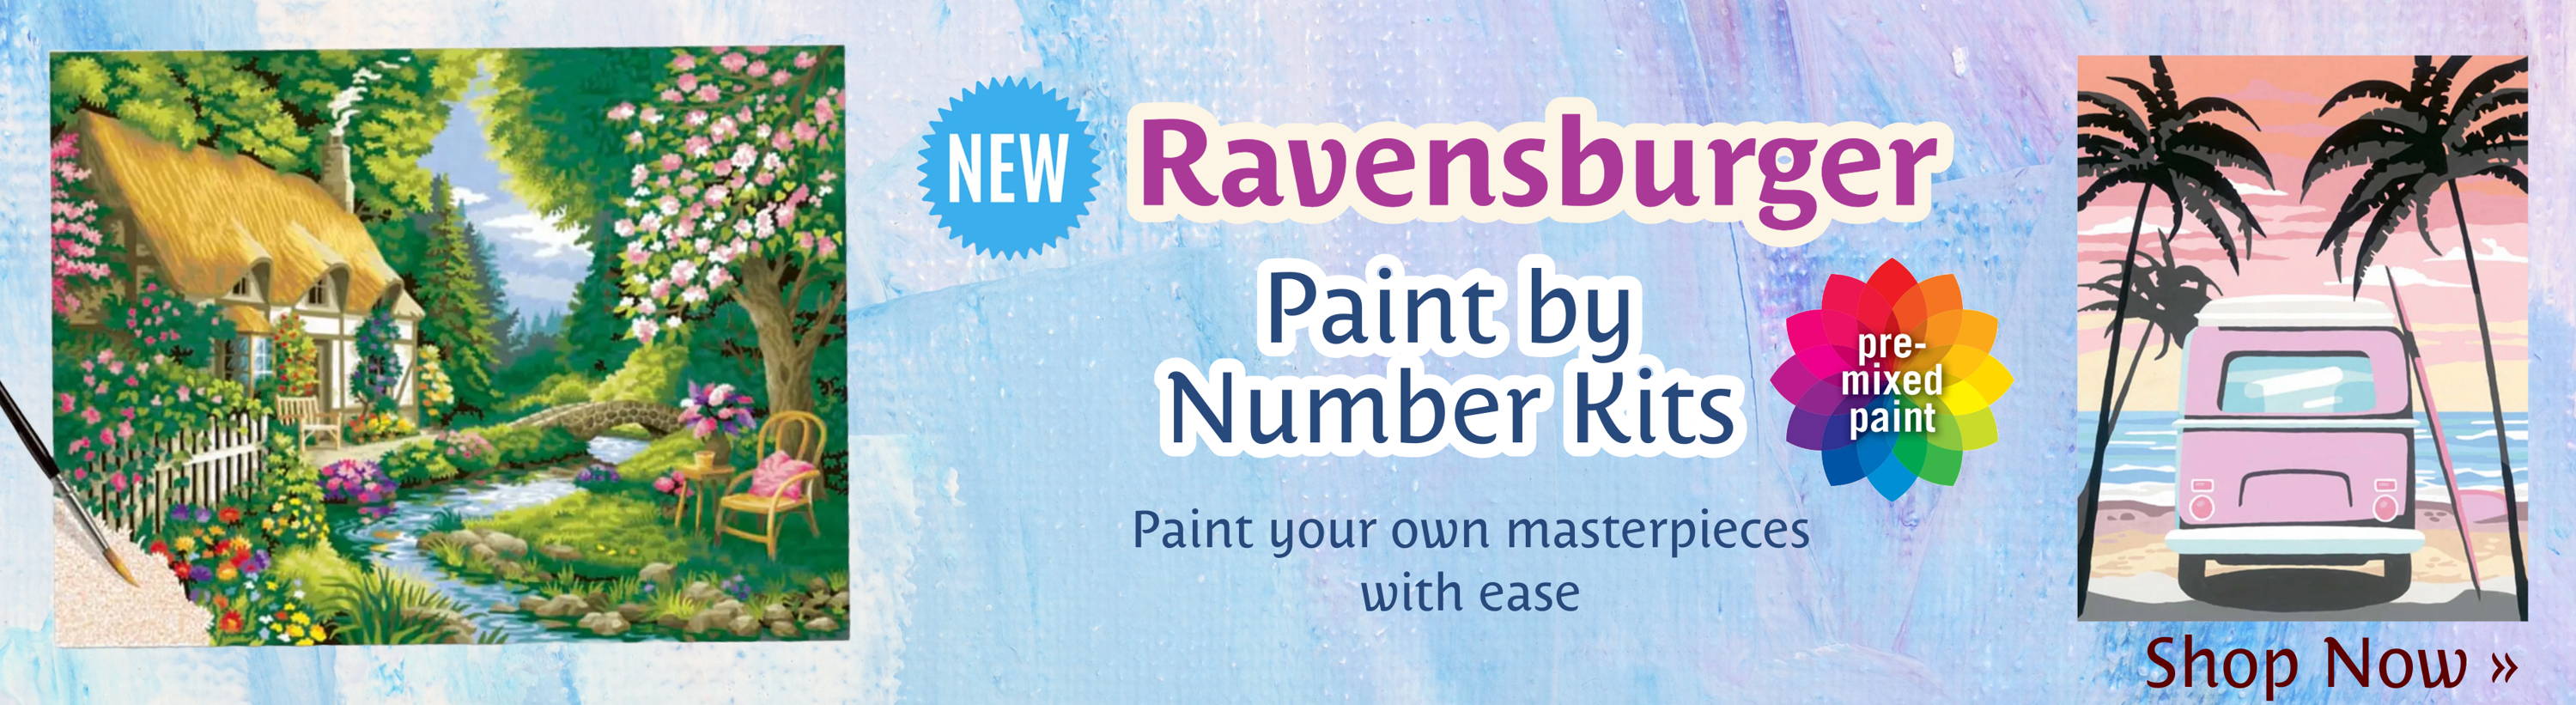 New! Ravensburger Paint by Number Kits with pre-mixed paints. Paint your own masterpieces with ease. Image: Ravensburger Paint by Number kits.